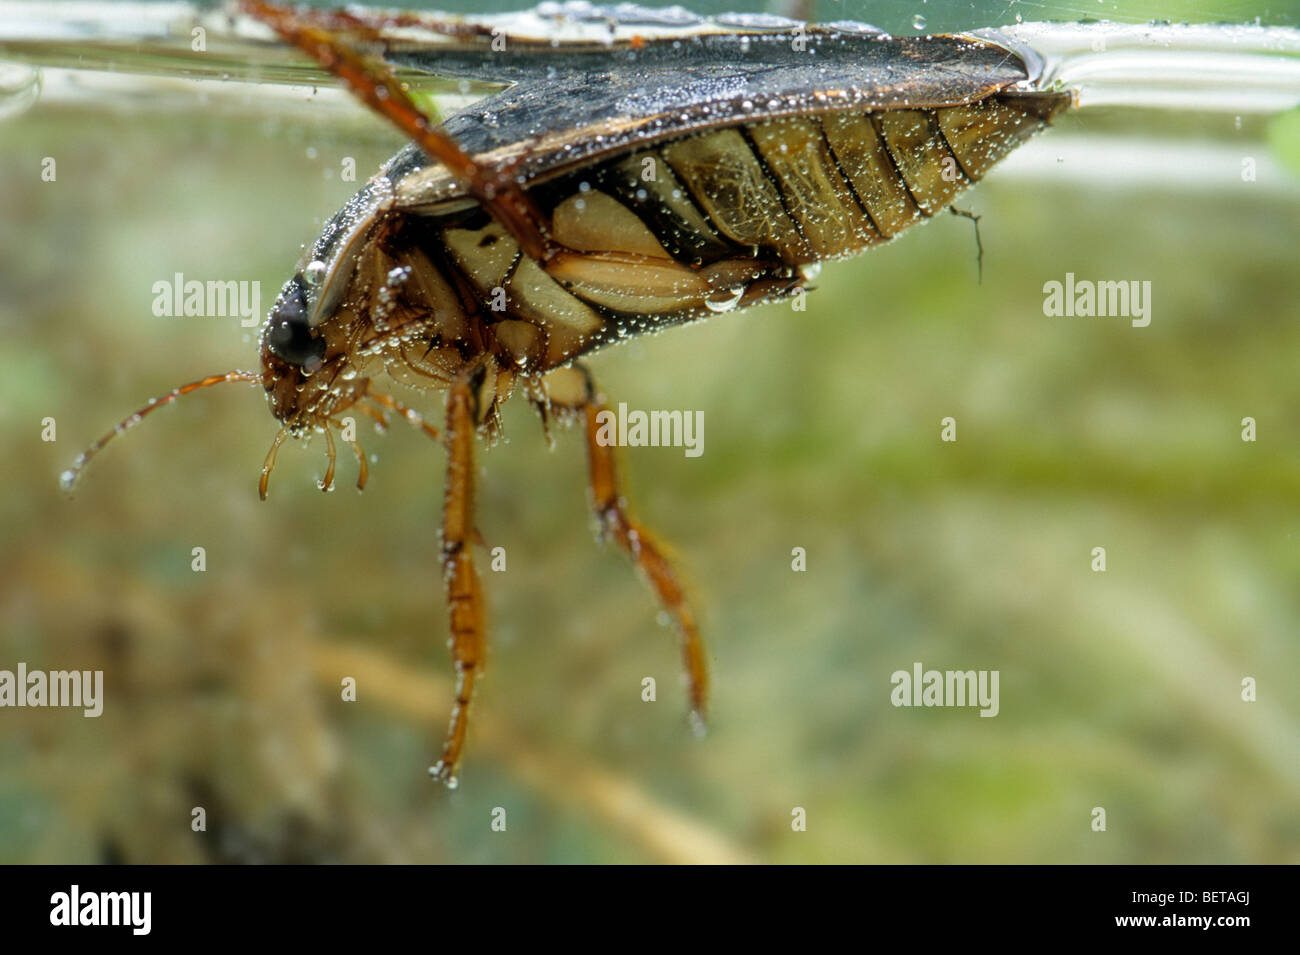 Great diving beetle (Dytiscus marginalis) breathing at surface in pond, Belgium Stock Photo